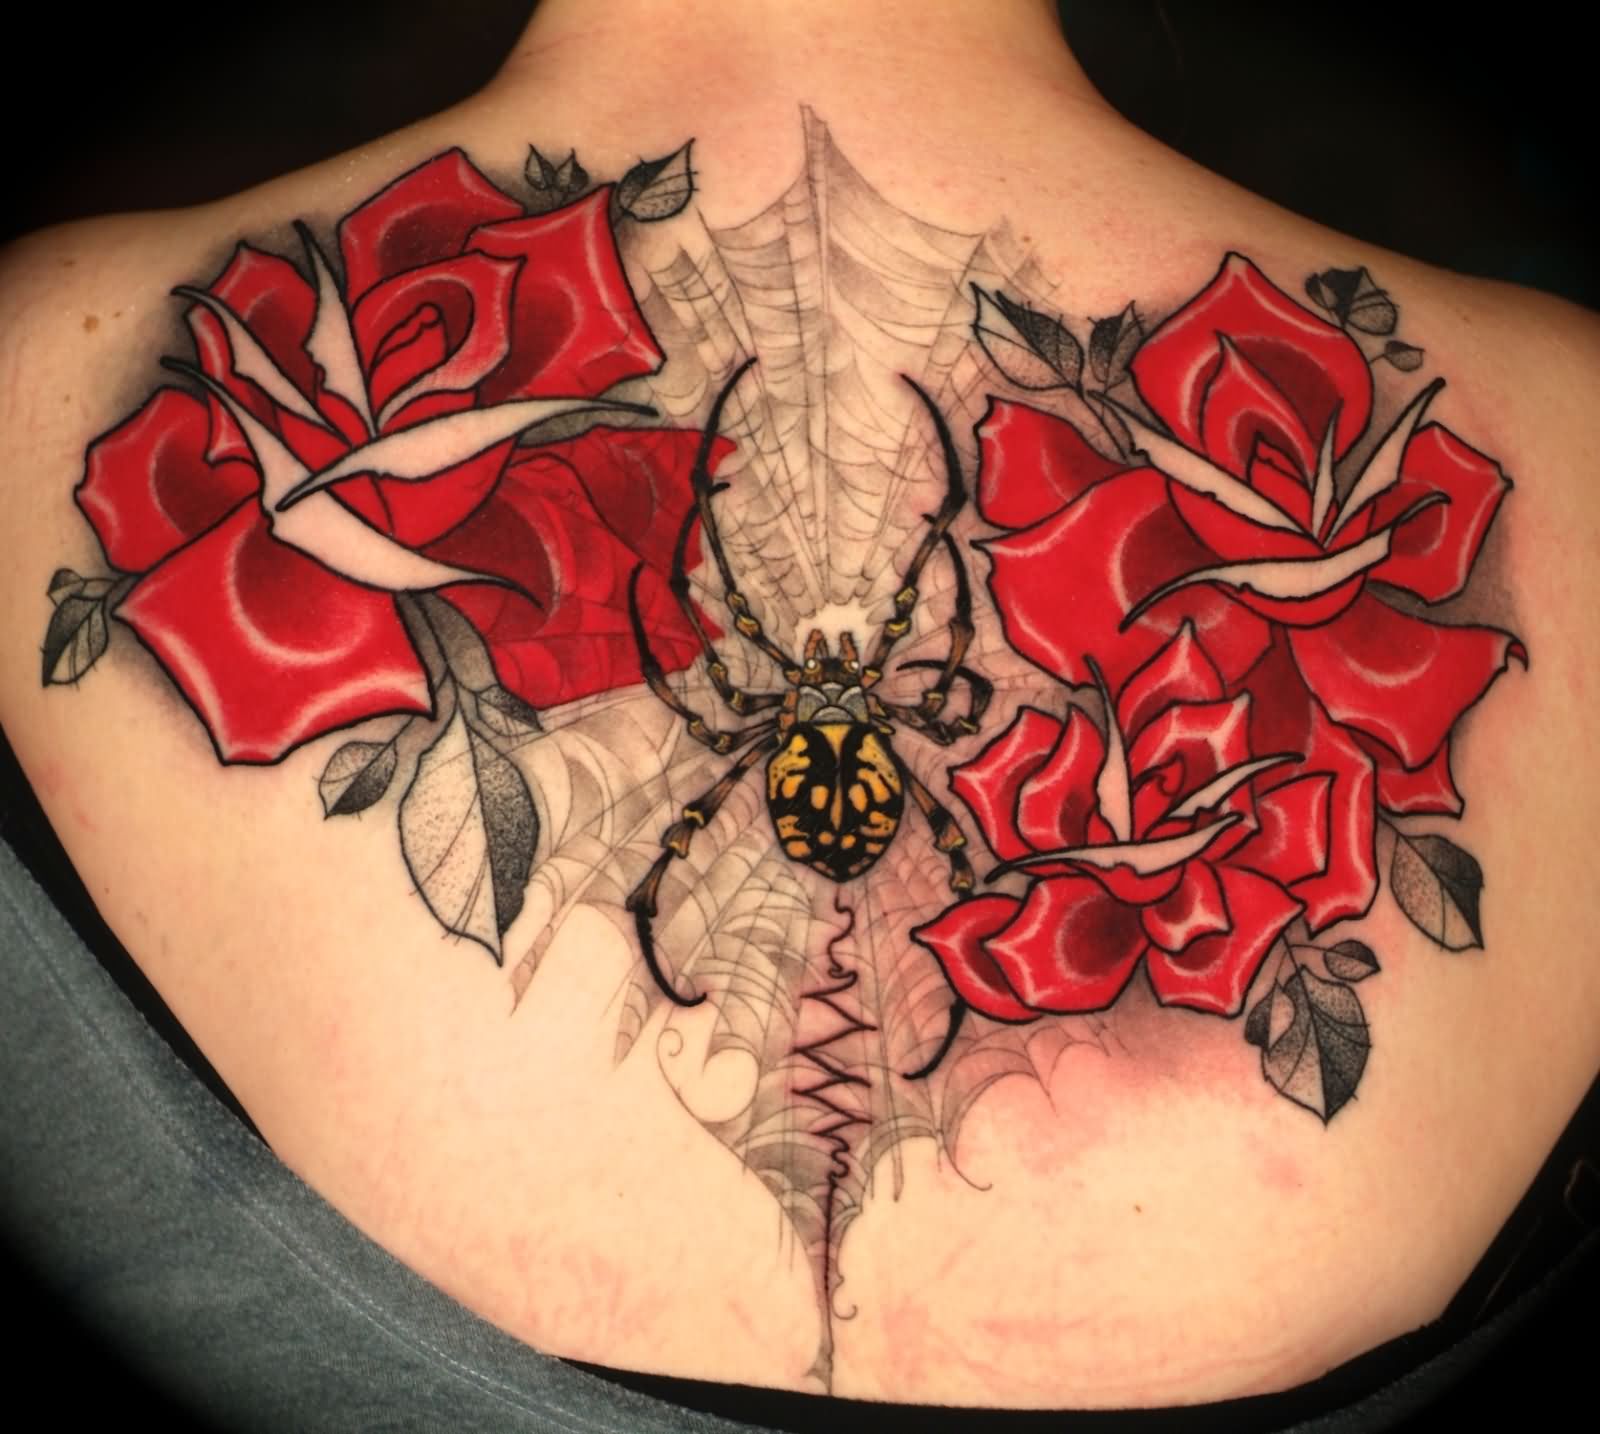 Spider With Roses Tattoo On Women Upper Back By Ben Merrell